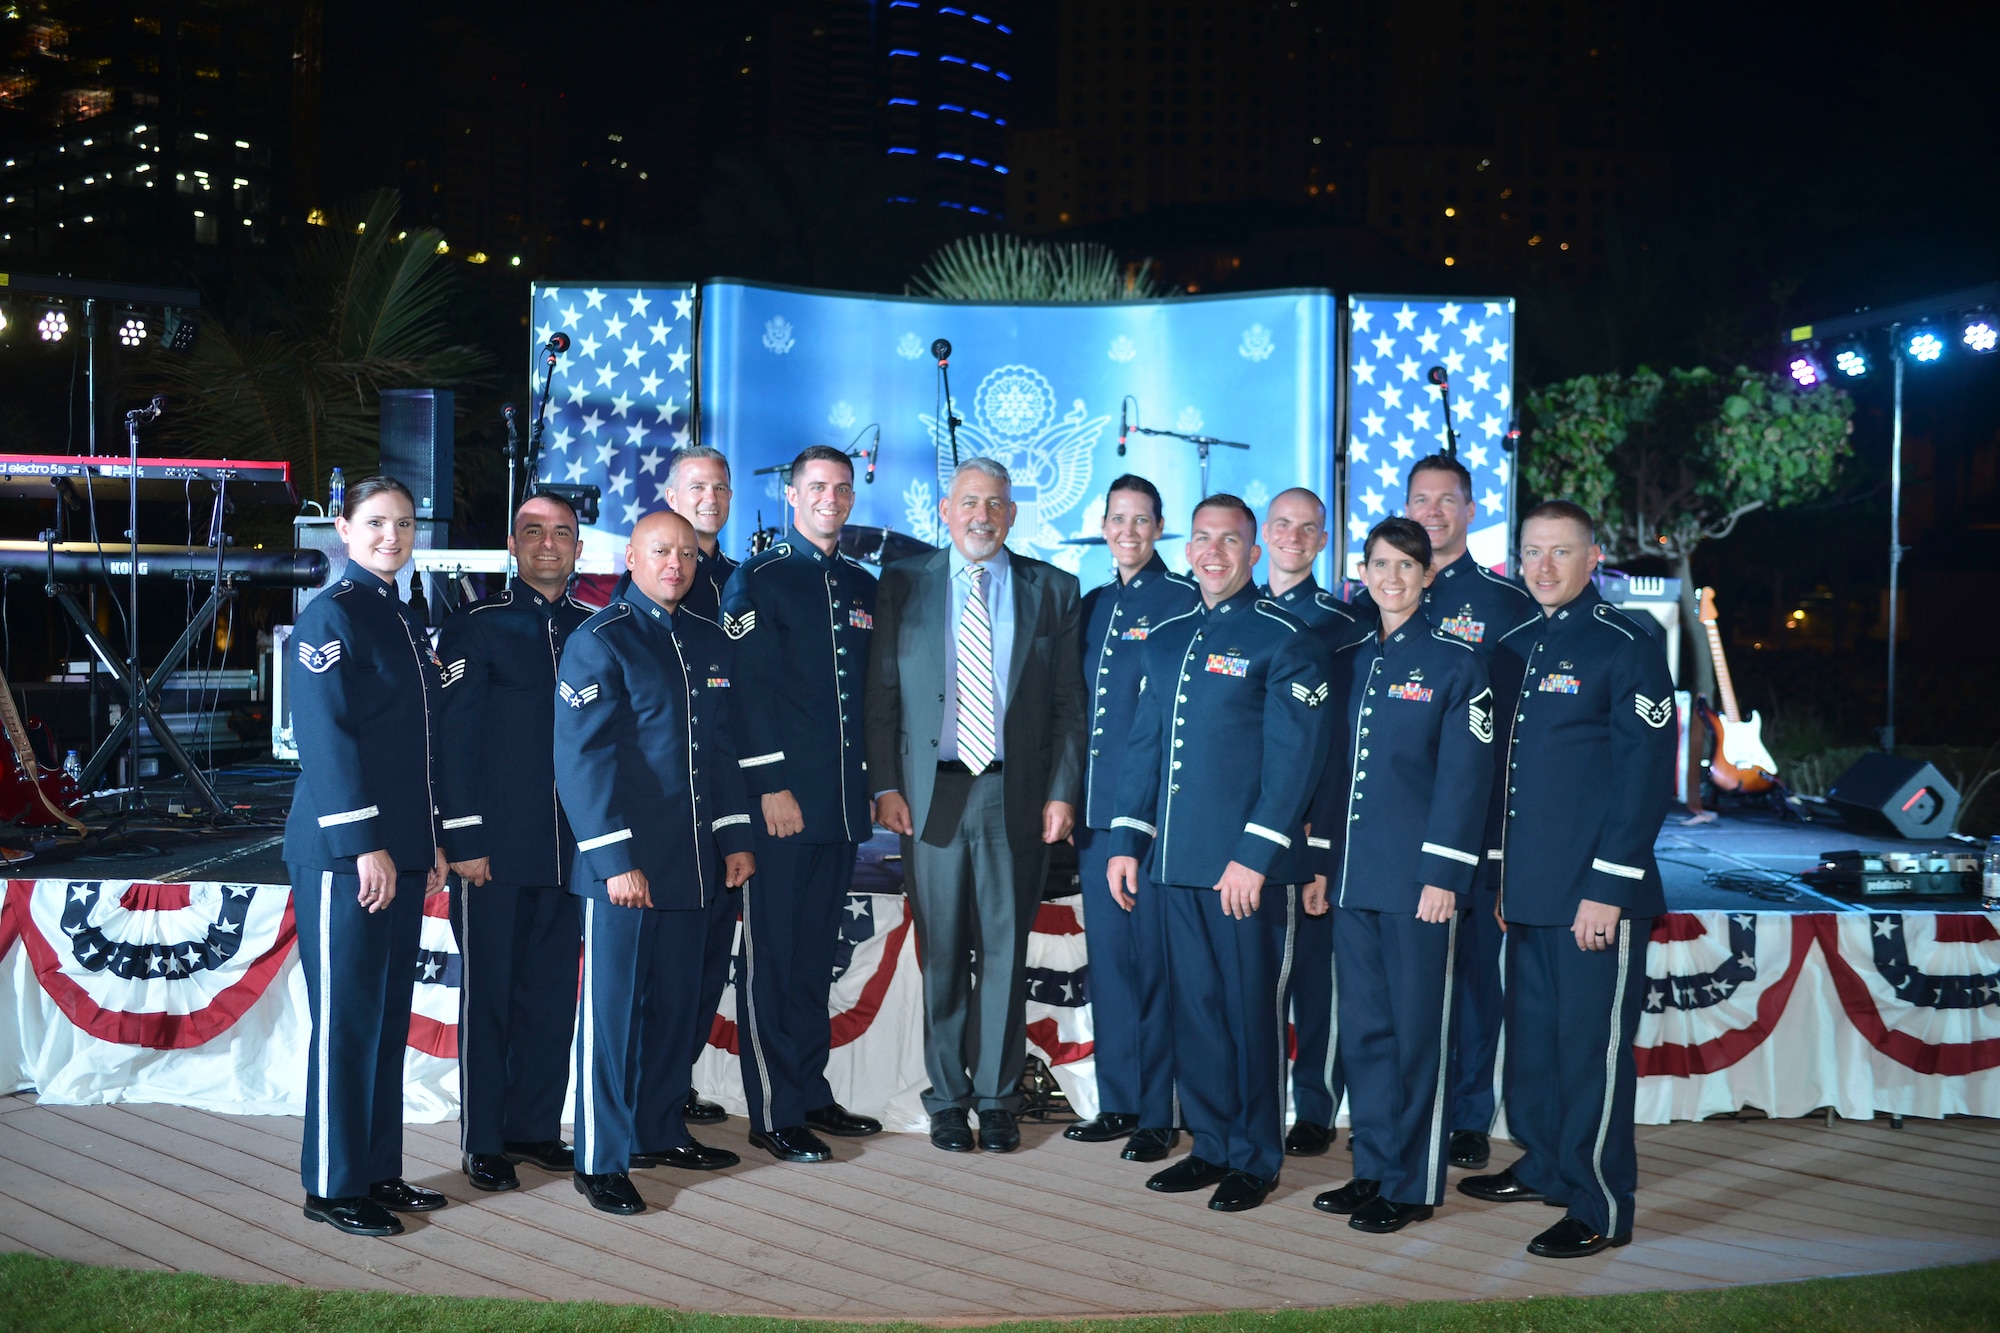 U.S. Air Forces Central Command band poses with Paul R. Malik, U.S. Consul General during the U.S. National Day celebration March 7, 2018 at the Ritz-Carlton Hotel and Resort, Dubai. The AFCENT band is a popular music ensemble comprised of American Airman who are charged with using music to bring diverse peoples from different cultures together to engender mutual appreciation and respect.(U.S. Air Force Photo by Tech Sgt. Anthony Nelson Jr. )